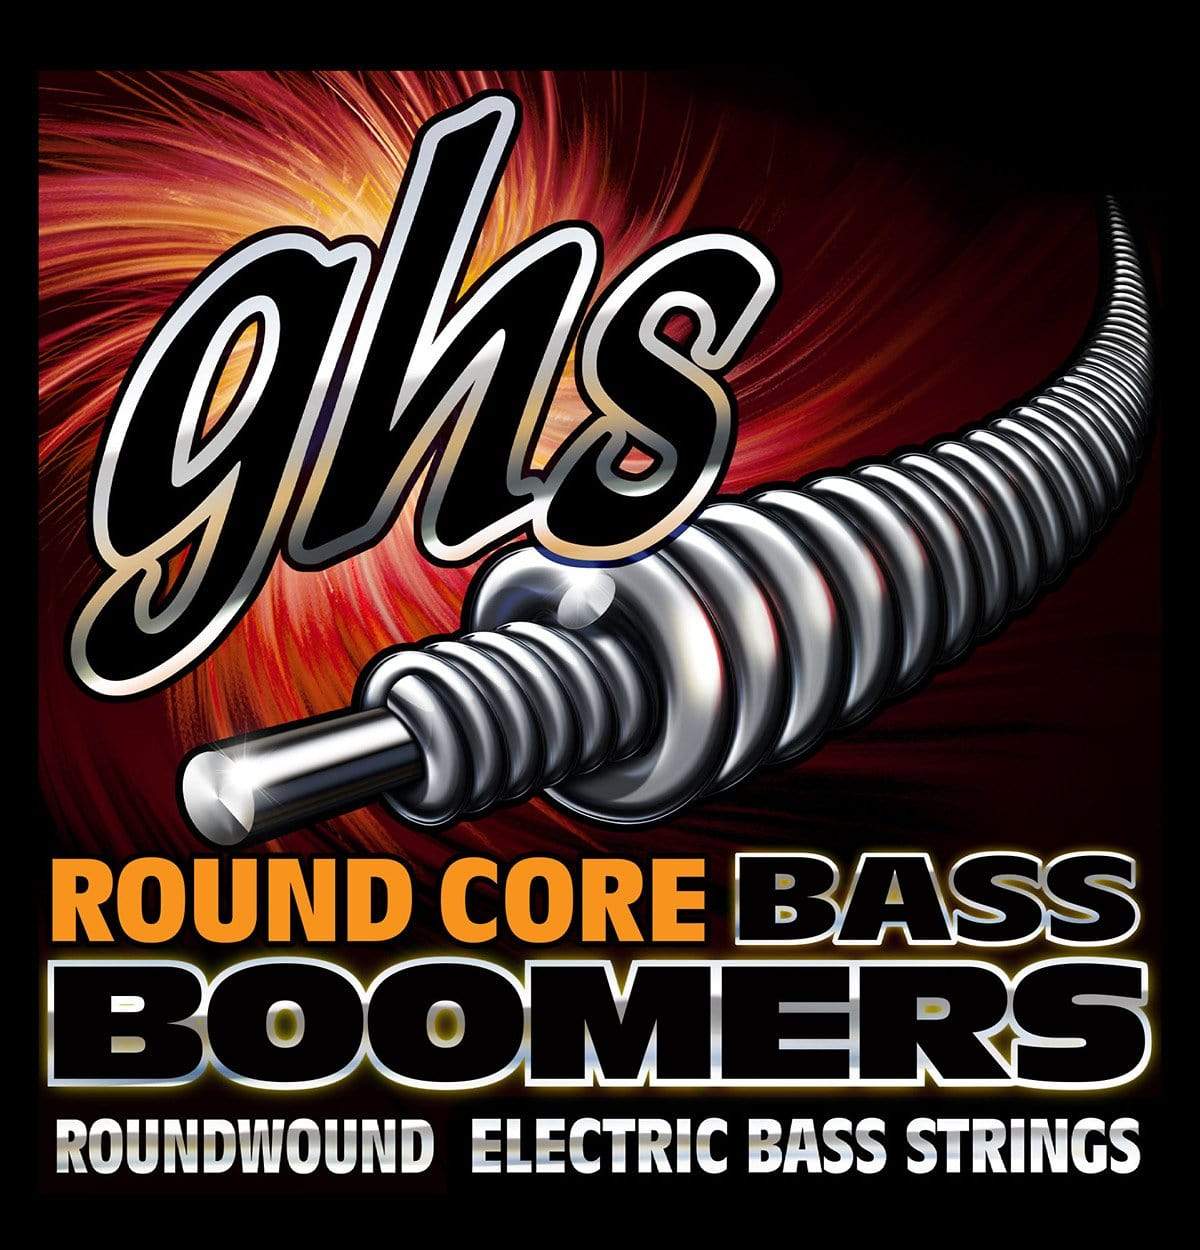 GHS Round Core Bass Boomers Universal Long Scale Medium Light 45-100 Accessories / Strings / Bass Strings